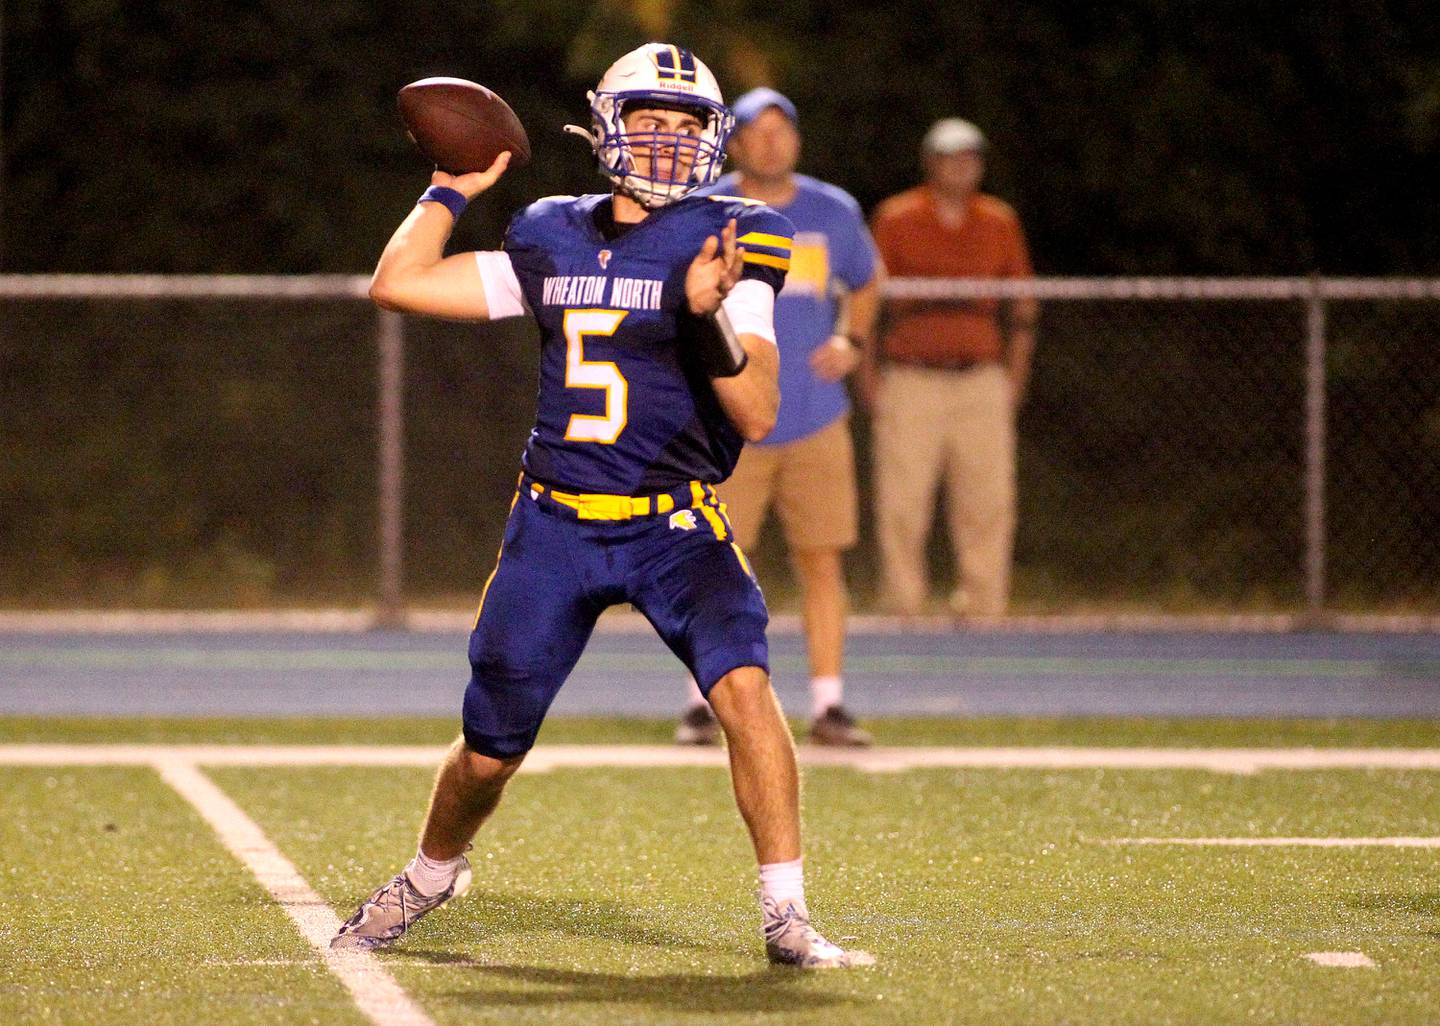 Wheaton North quarterback Mark Forcucci throws the ball during a home game against St. Charles North on Friday, Sept. 17, 2021.